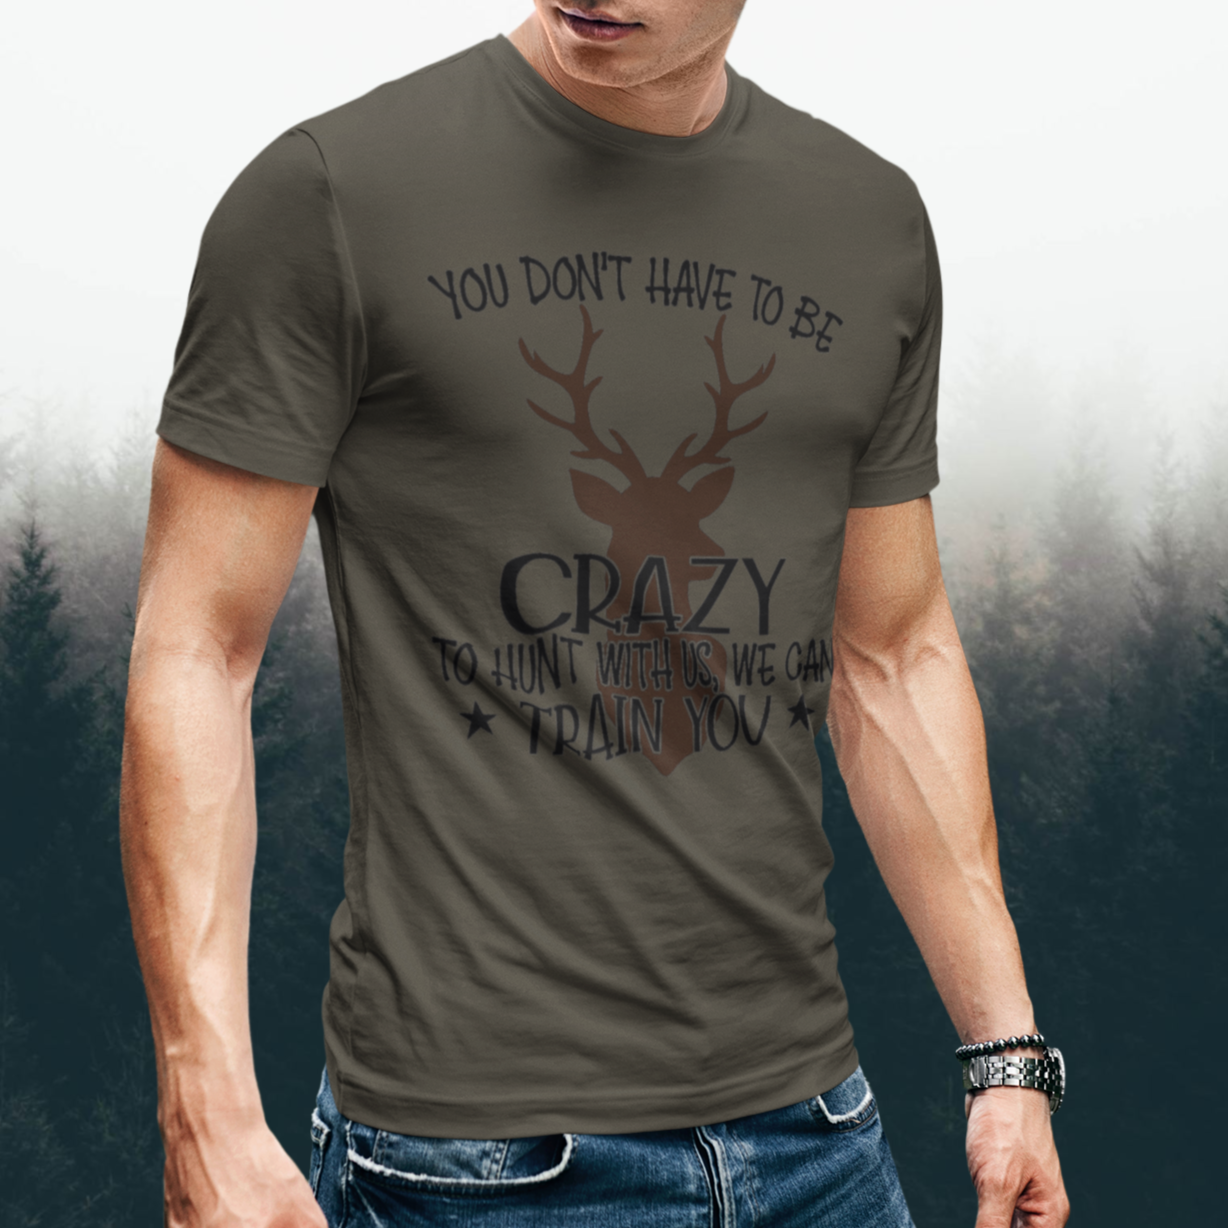 you-dont-have-to-be-crazy-to-hunt-with-us-we-can-train-you-army-green-t-shirt-mockup-featuring-a-serious-looking-man